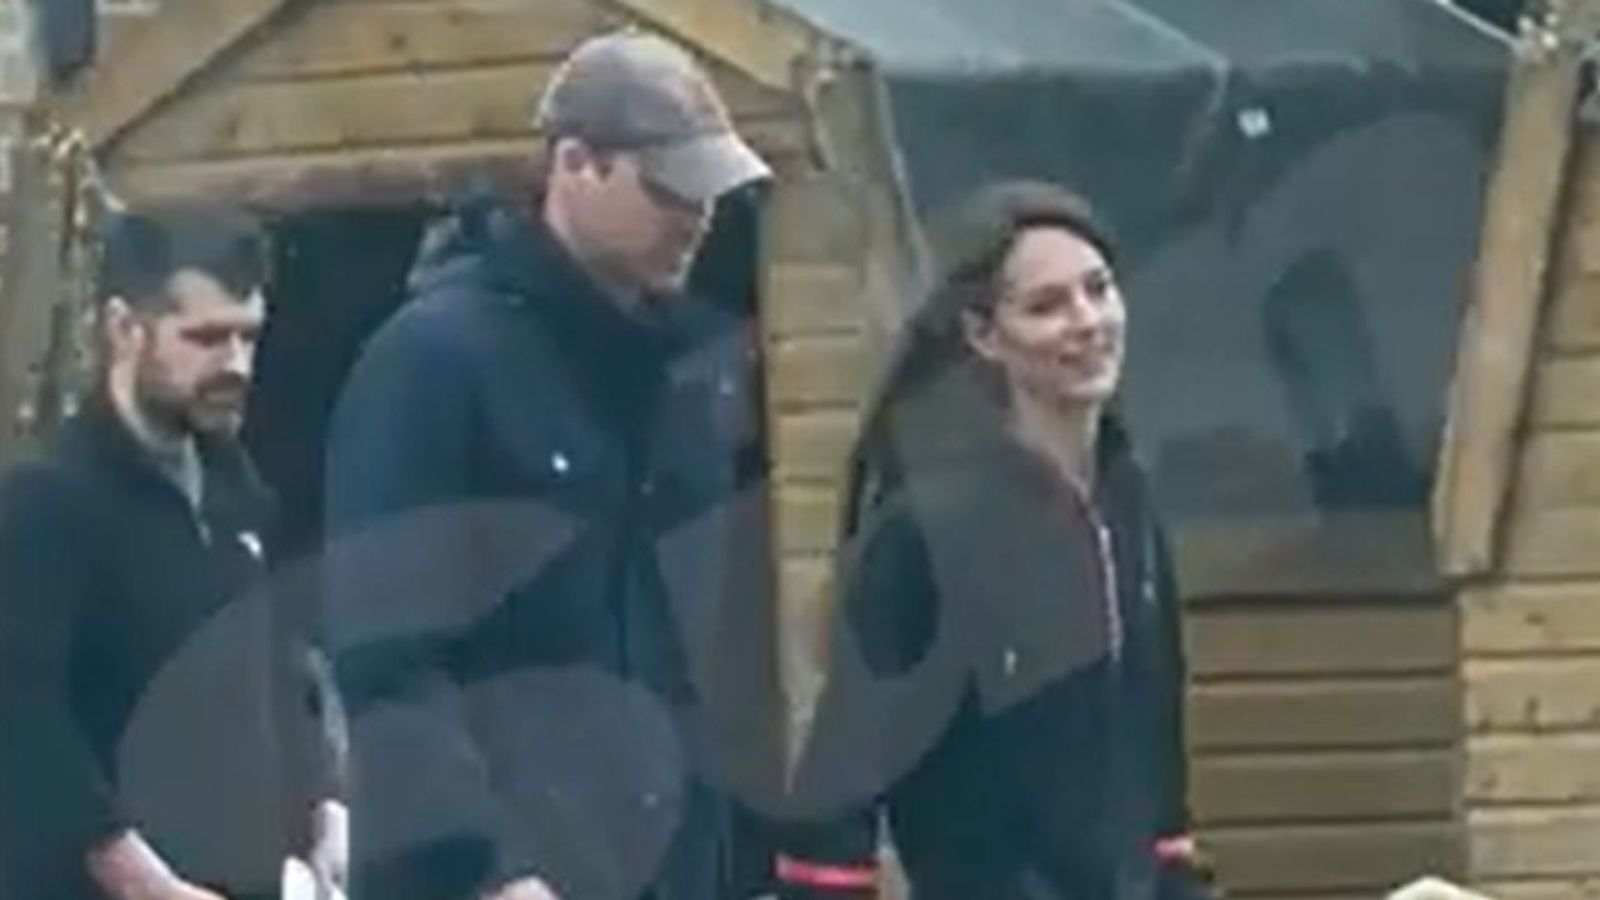 Princess of Wales: A ‘happy and smiling’ Kate filmed out shopping with Prince William